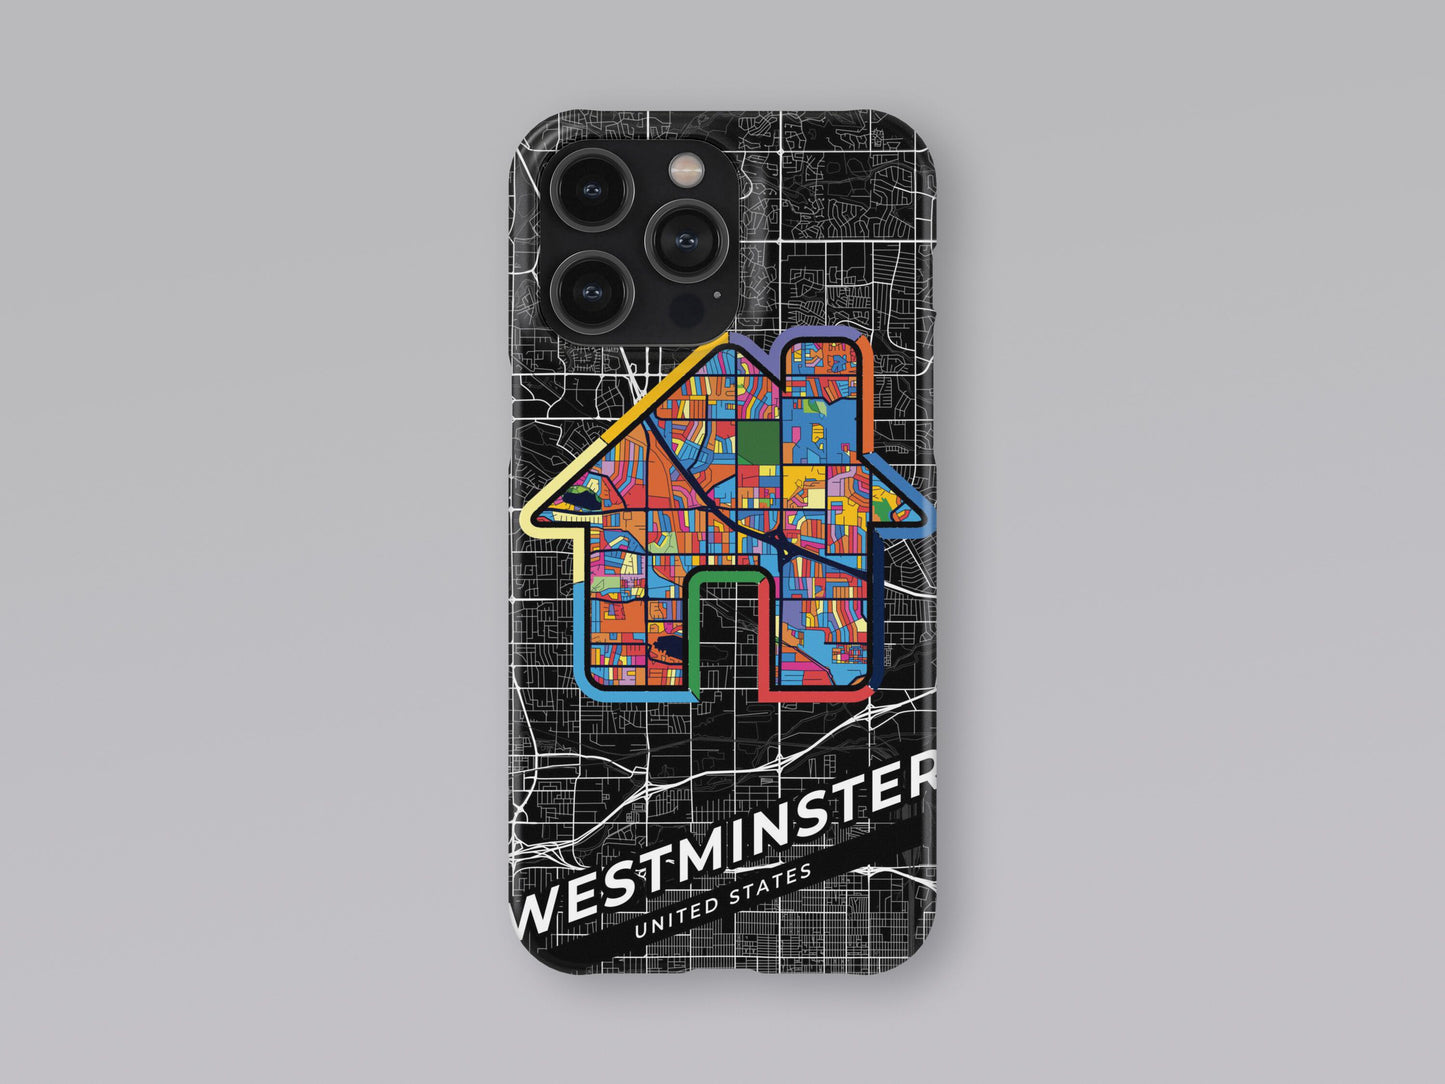 Westminster Colorado slim phone case with colorful icon 3